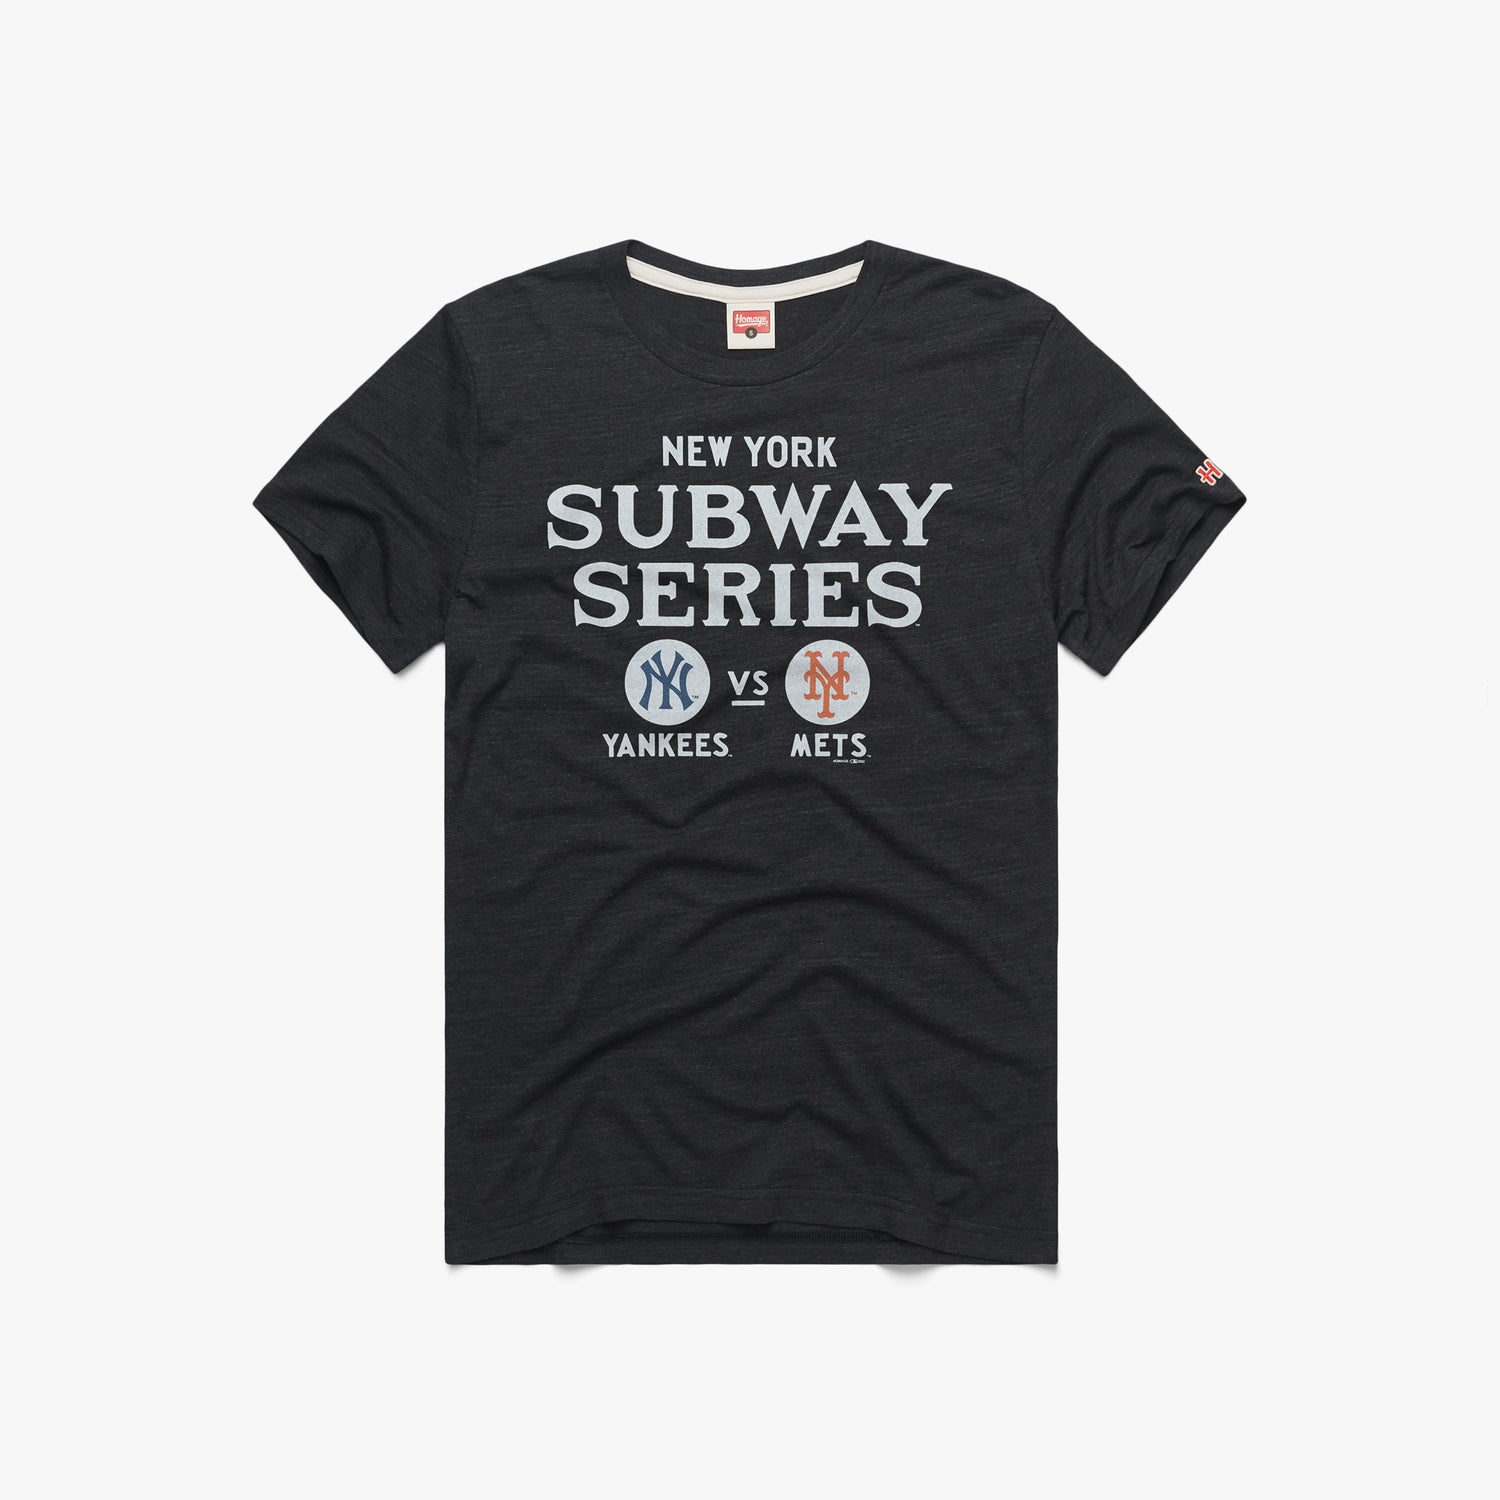 New York Subway Series Yankees Vs Mets T-Shirt from Homage. | Charcoal | Vintage Apparel from Homage.